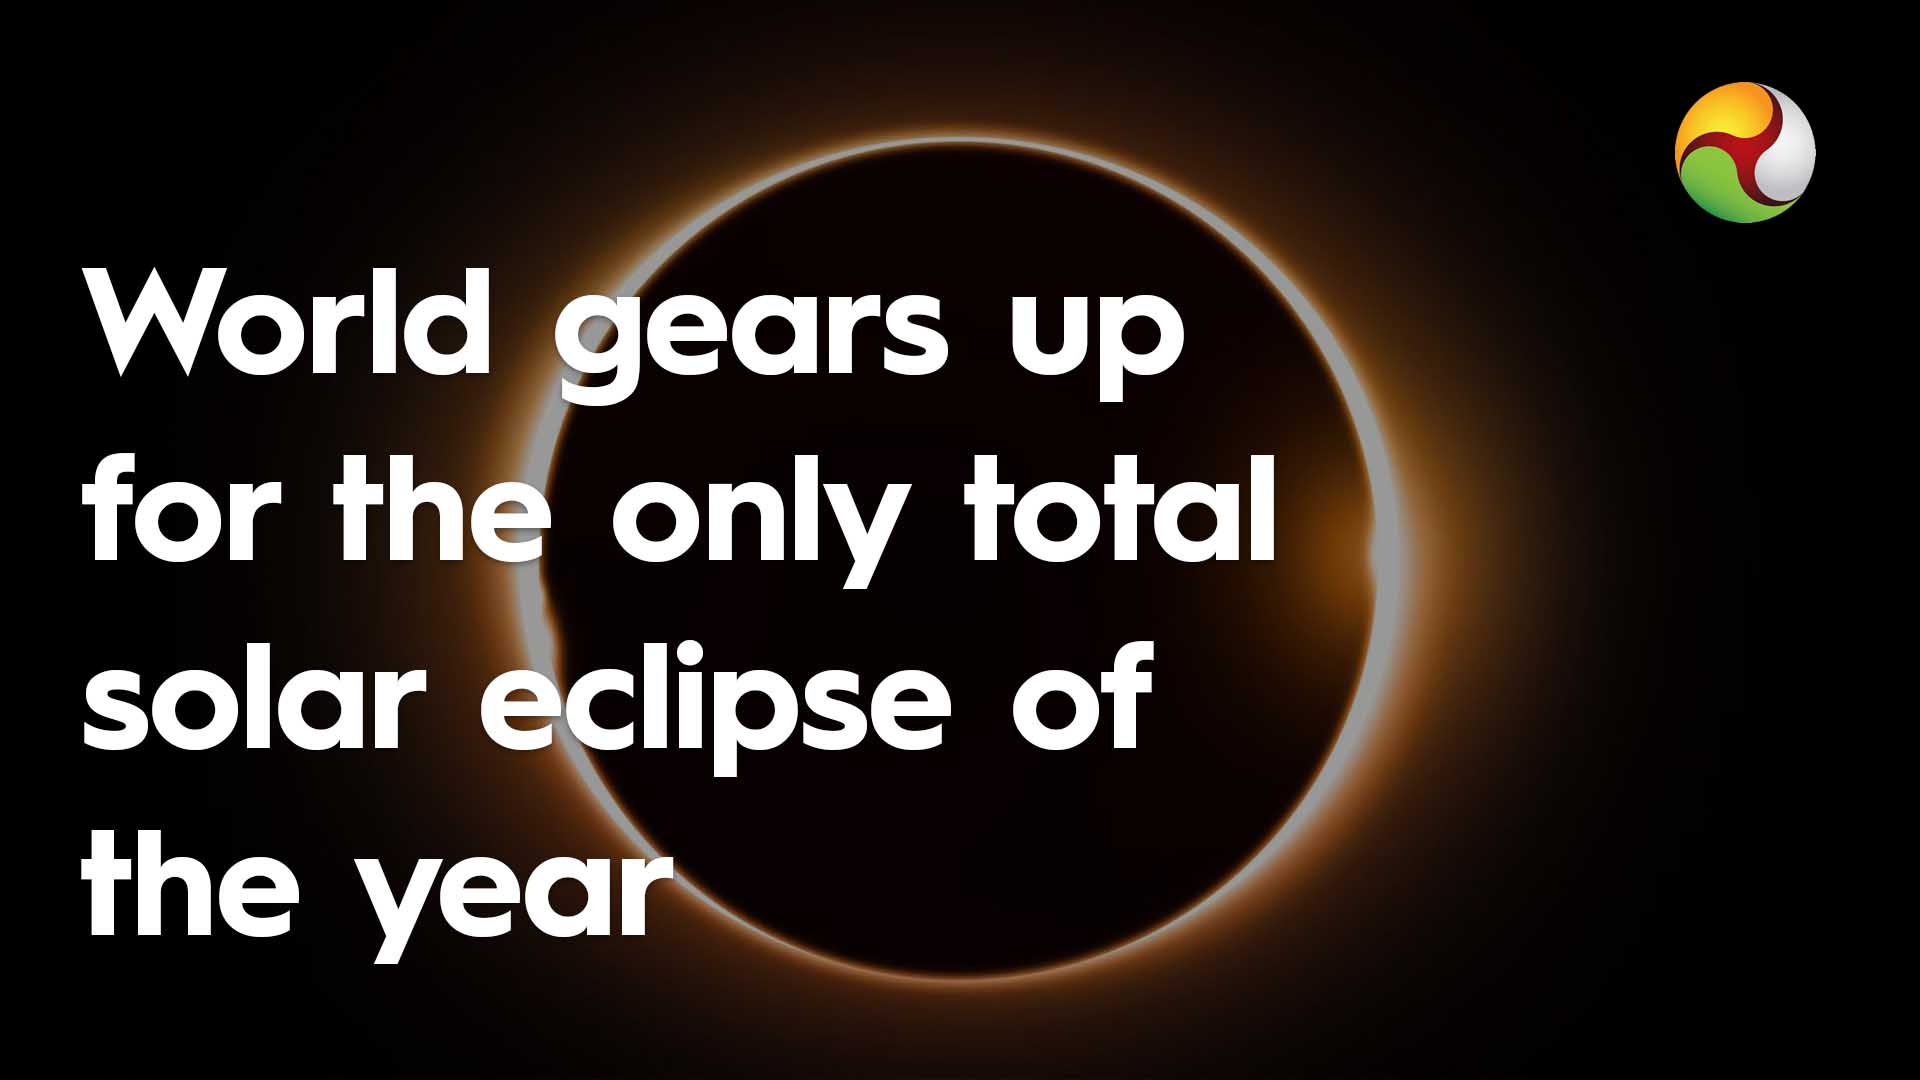 World gears up for the only total solar eclipse of the year